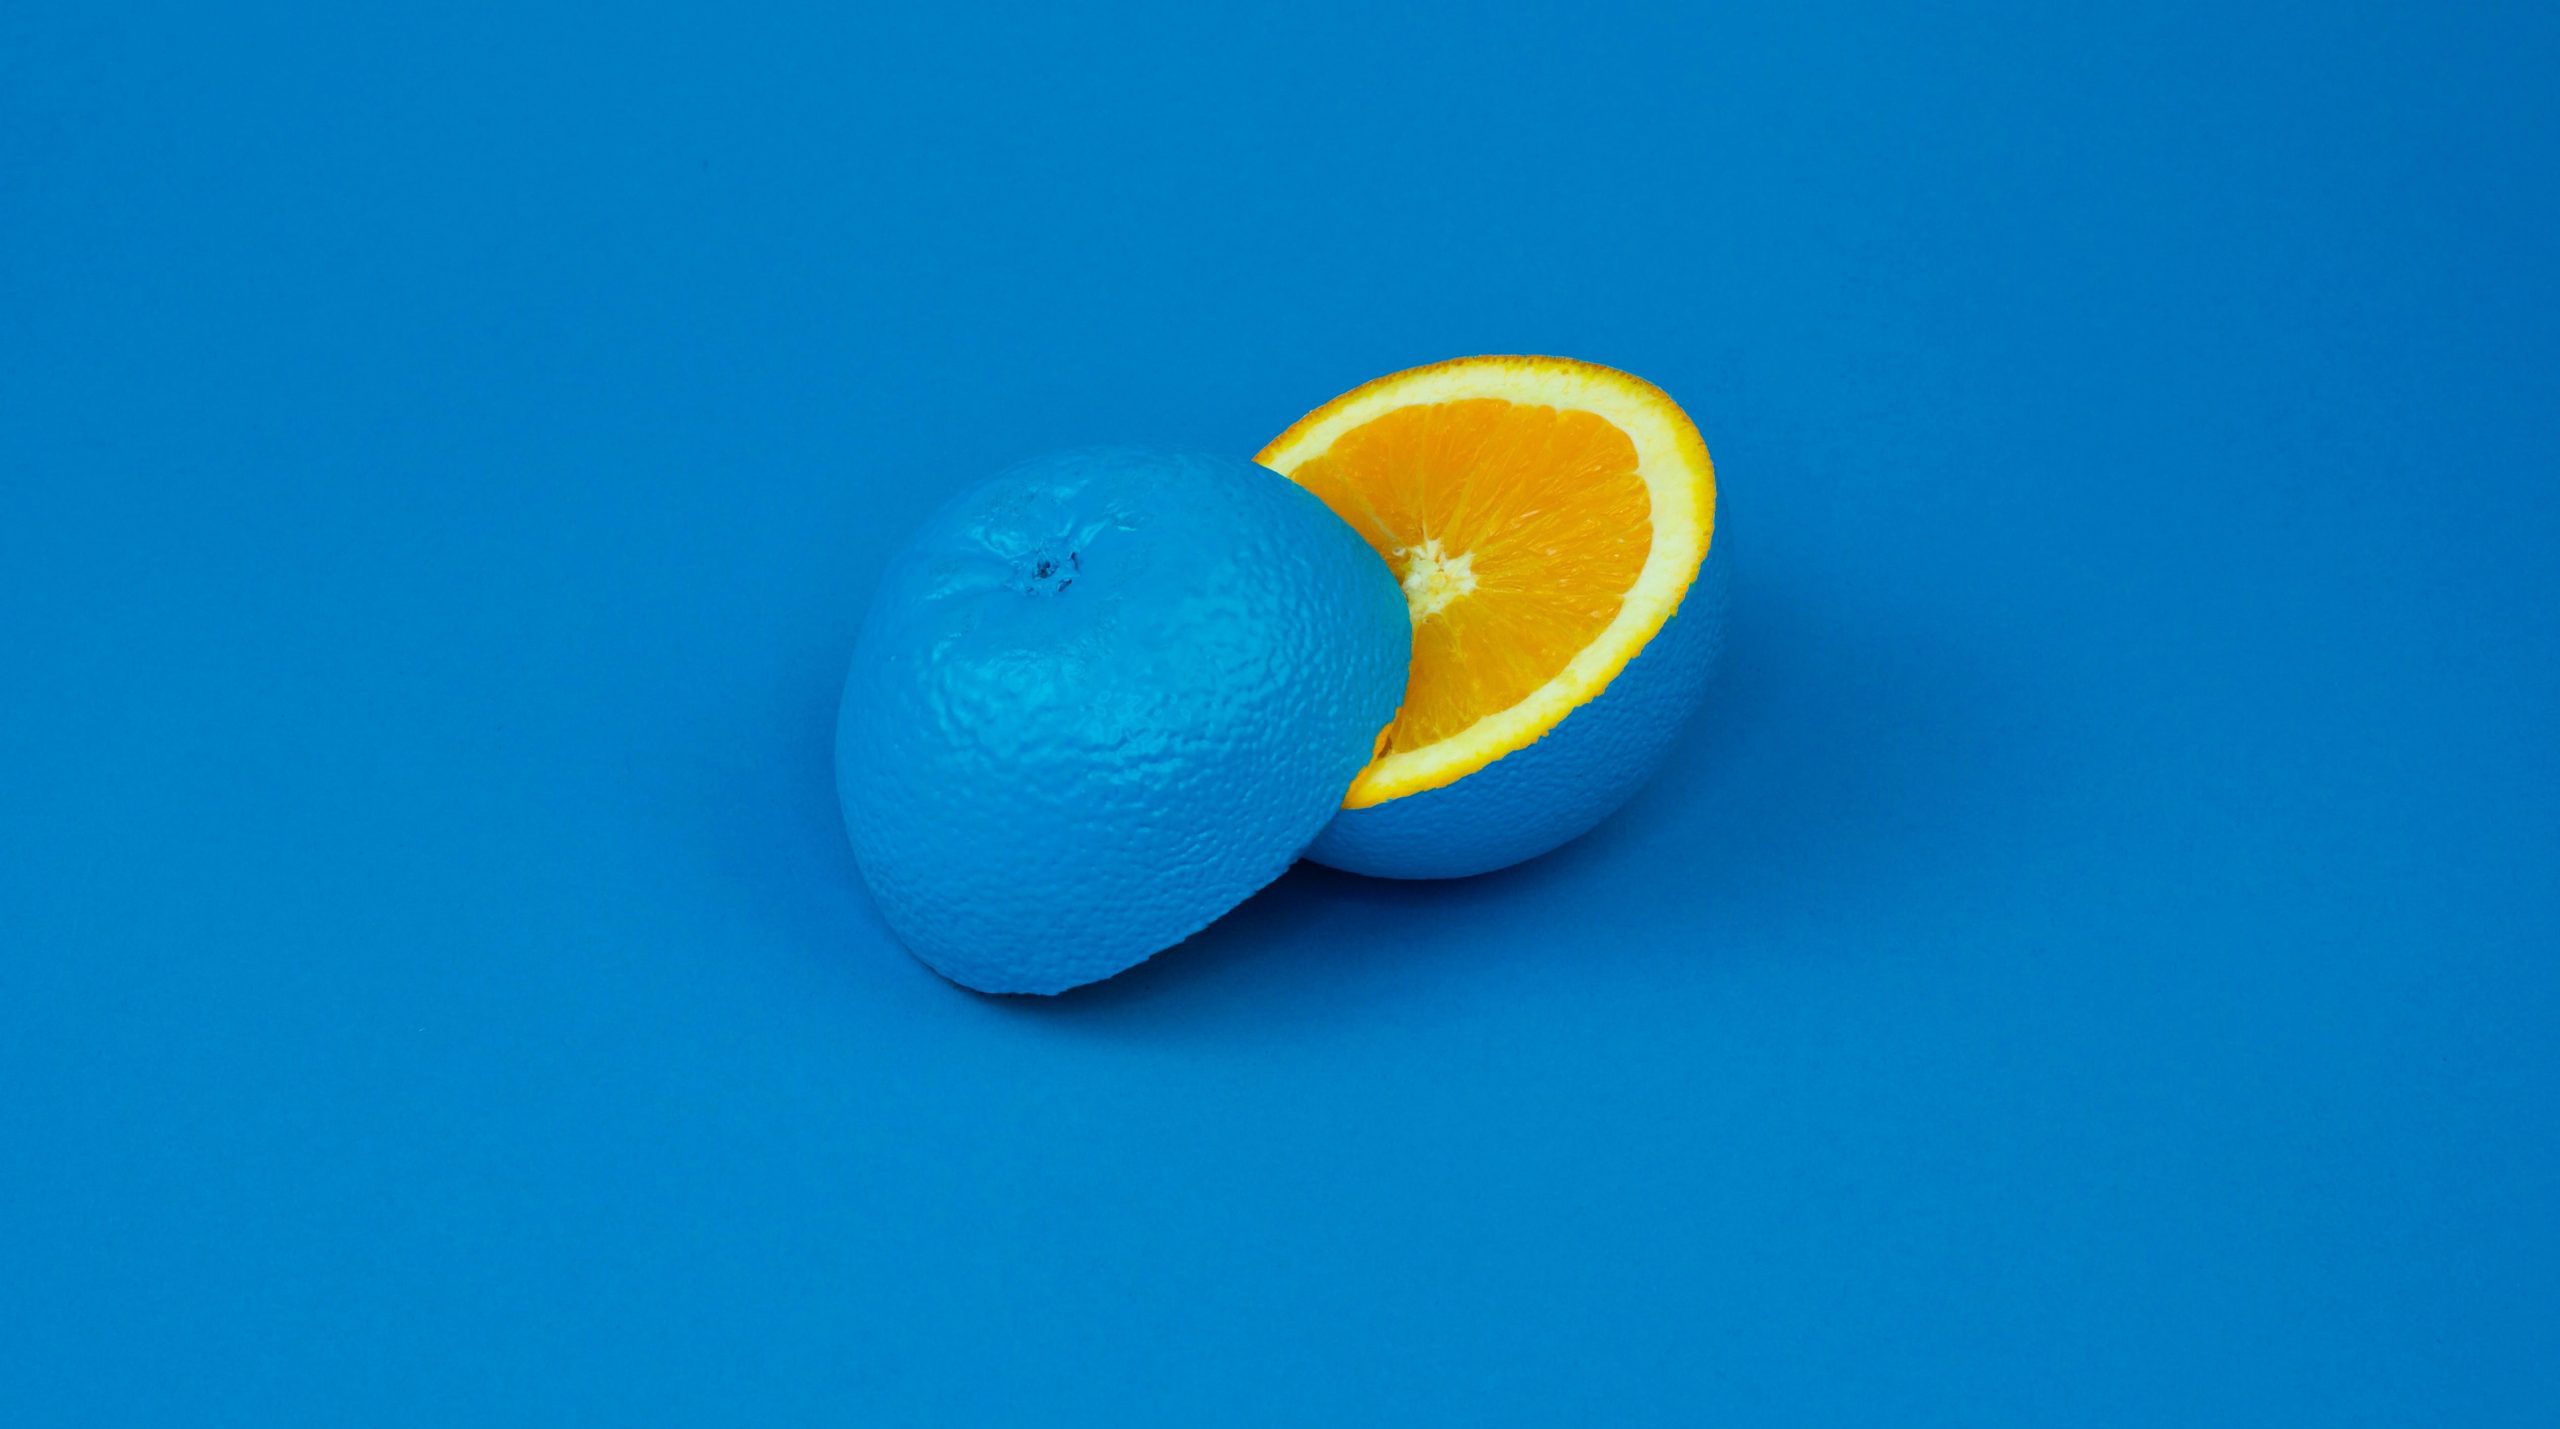 Sliced orange with blue coating and a blue background.